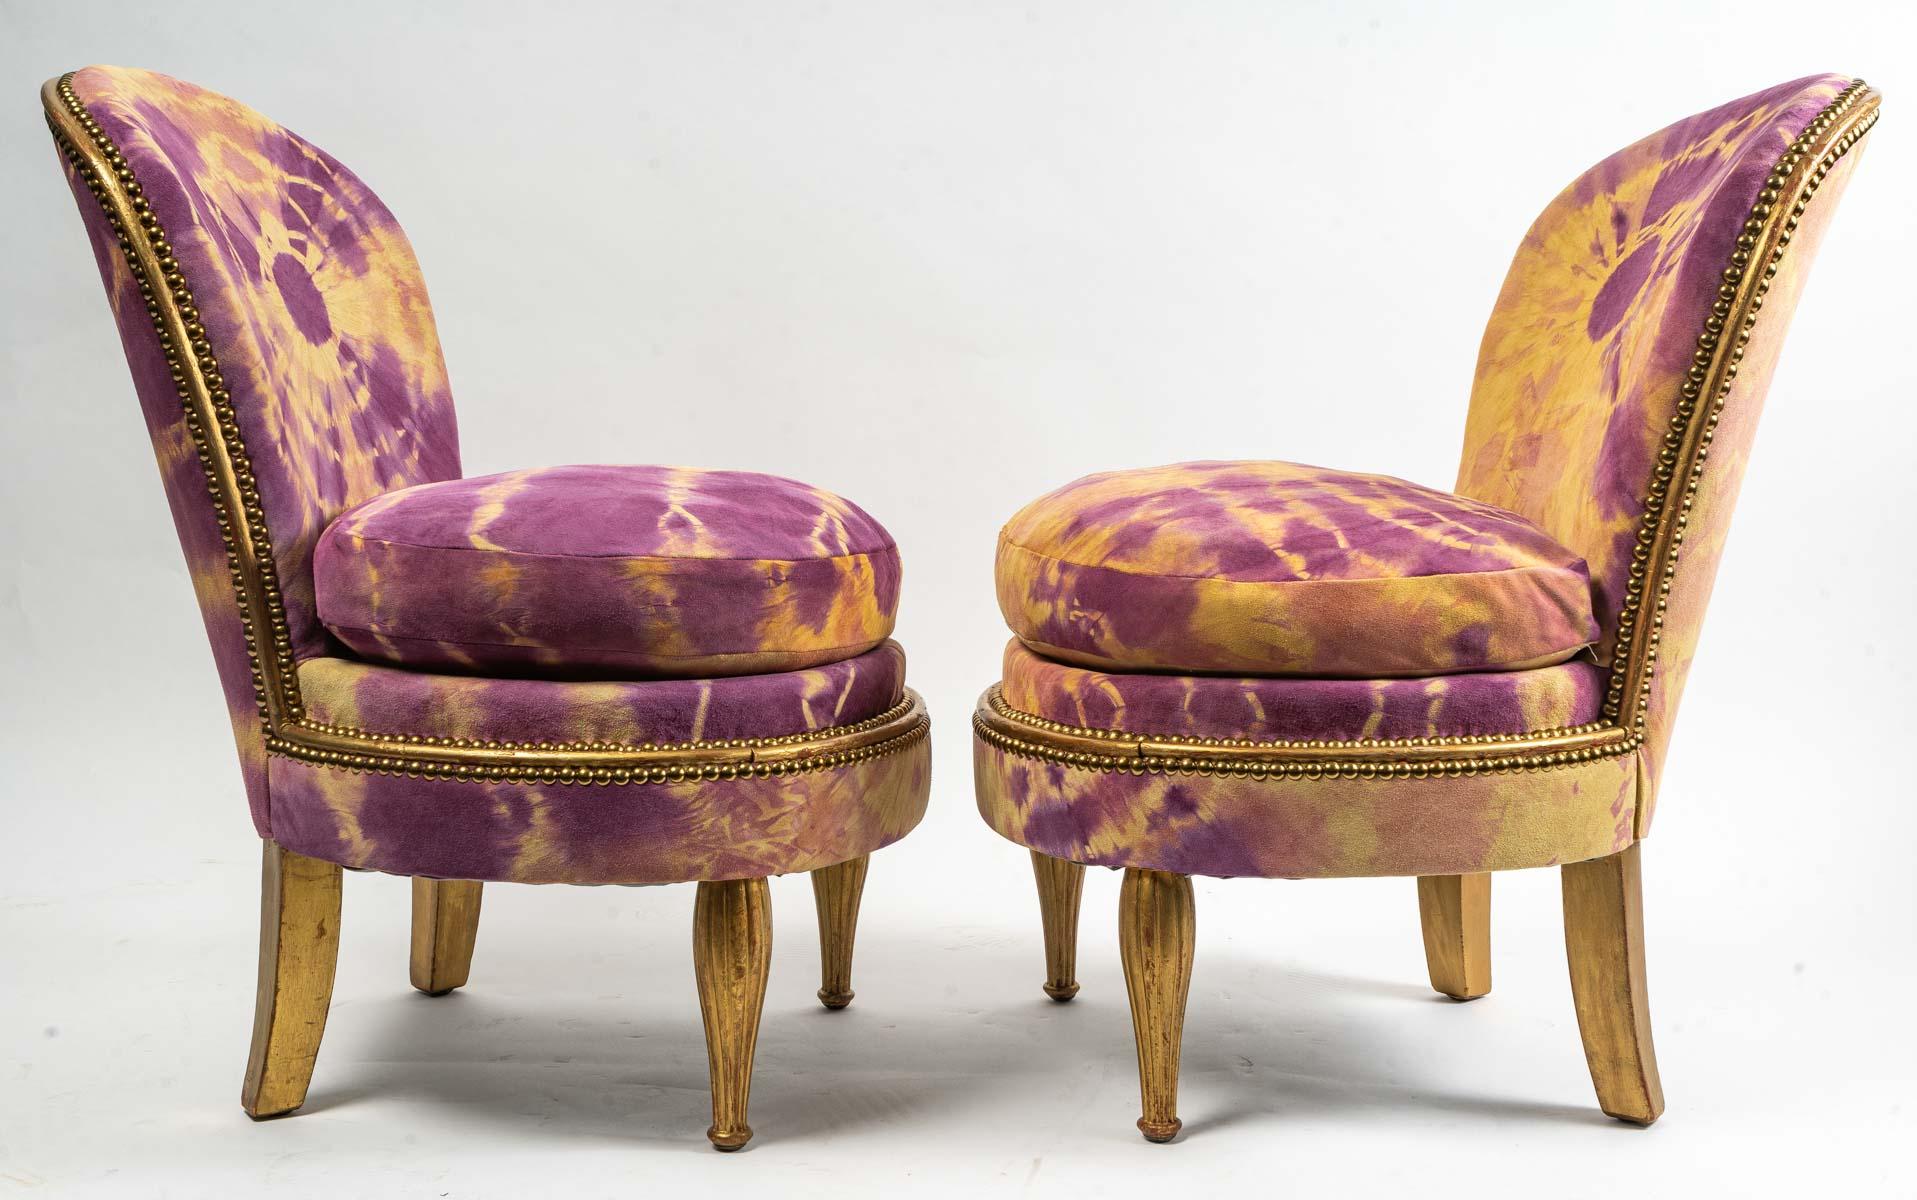 20th Century Pair of Art Deco Armchairs, Jean-Paul Gautier Leather, Art Deco Period For Sale